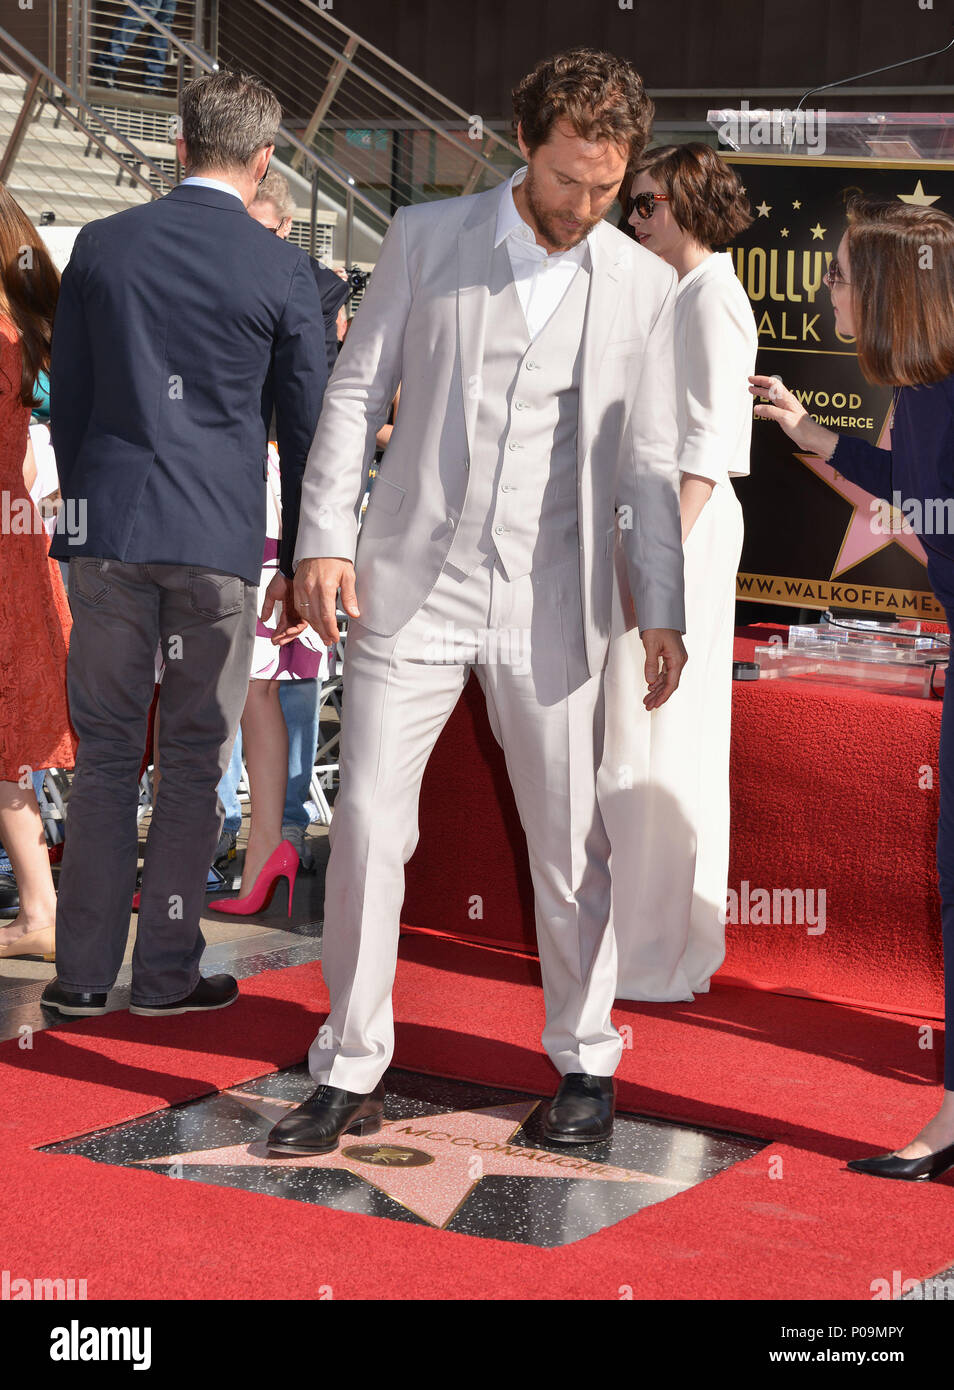 Matthew McConaughey Honored with a Star on the Hollywood Walk of Fame, November 17, 2014 in Los Angeles. a Matthew McConaughey - Star 018a Matthew McConaughey - Star 018  Event in Hollywood Life - California, Red Carpet Event, USA, Film Industry, Celebrities, Photography, Bestof, Arts Culture and Entertainment, Topix Celebrities fashion, Best of, Hollywood Life, Event in Hollywood Life - California, movie celebrities, TV celebrities, Music celebrities, Topix, Bestof, Arts Culture and Entertainment, Photography,    inquiry tsuni@Gamma-USA.com , Credit Tsuni / USA, Honored with a Star on the Hol Stock Photo